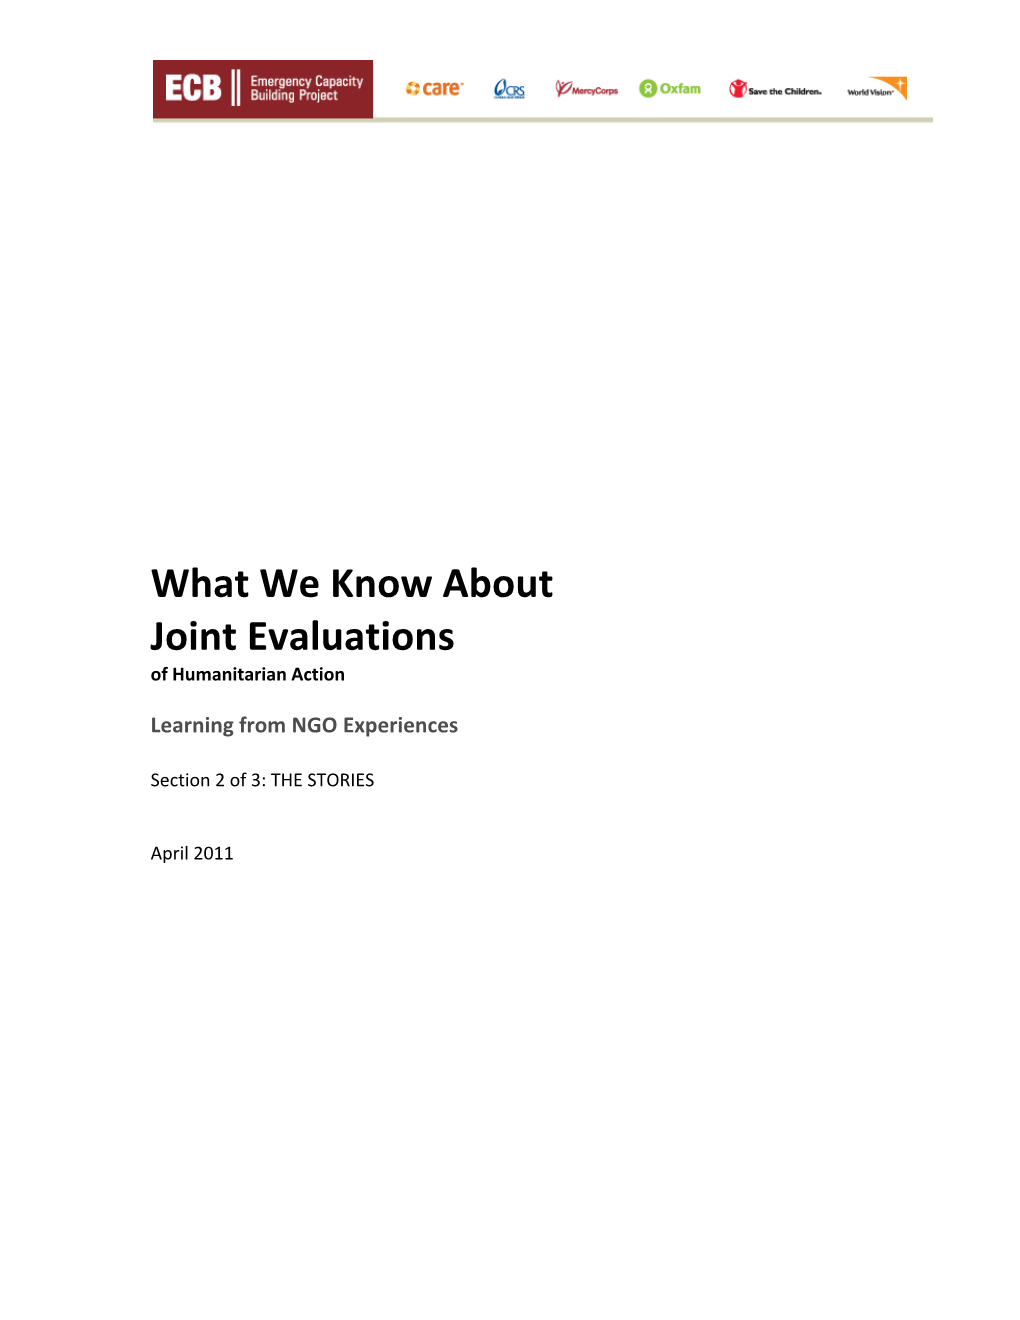 What We Know About Joint Evaluations of Humanitarian Action